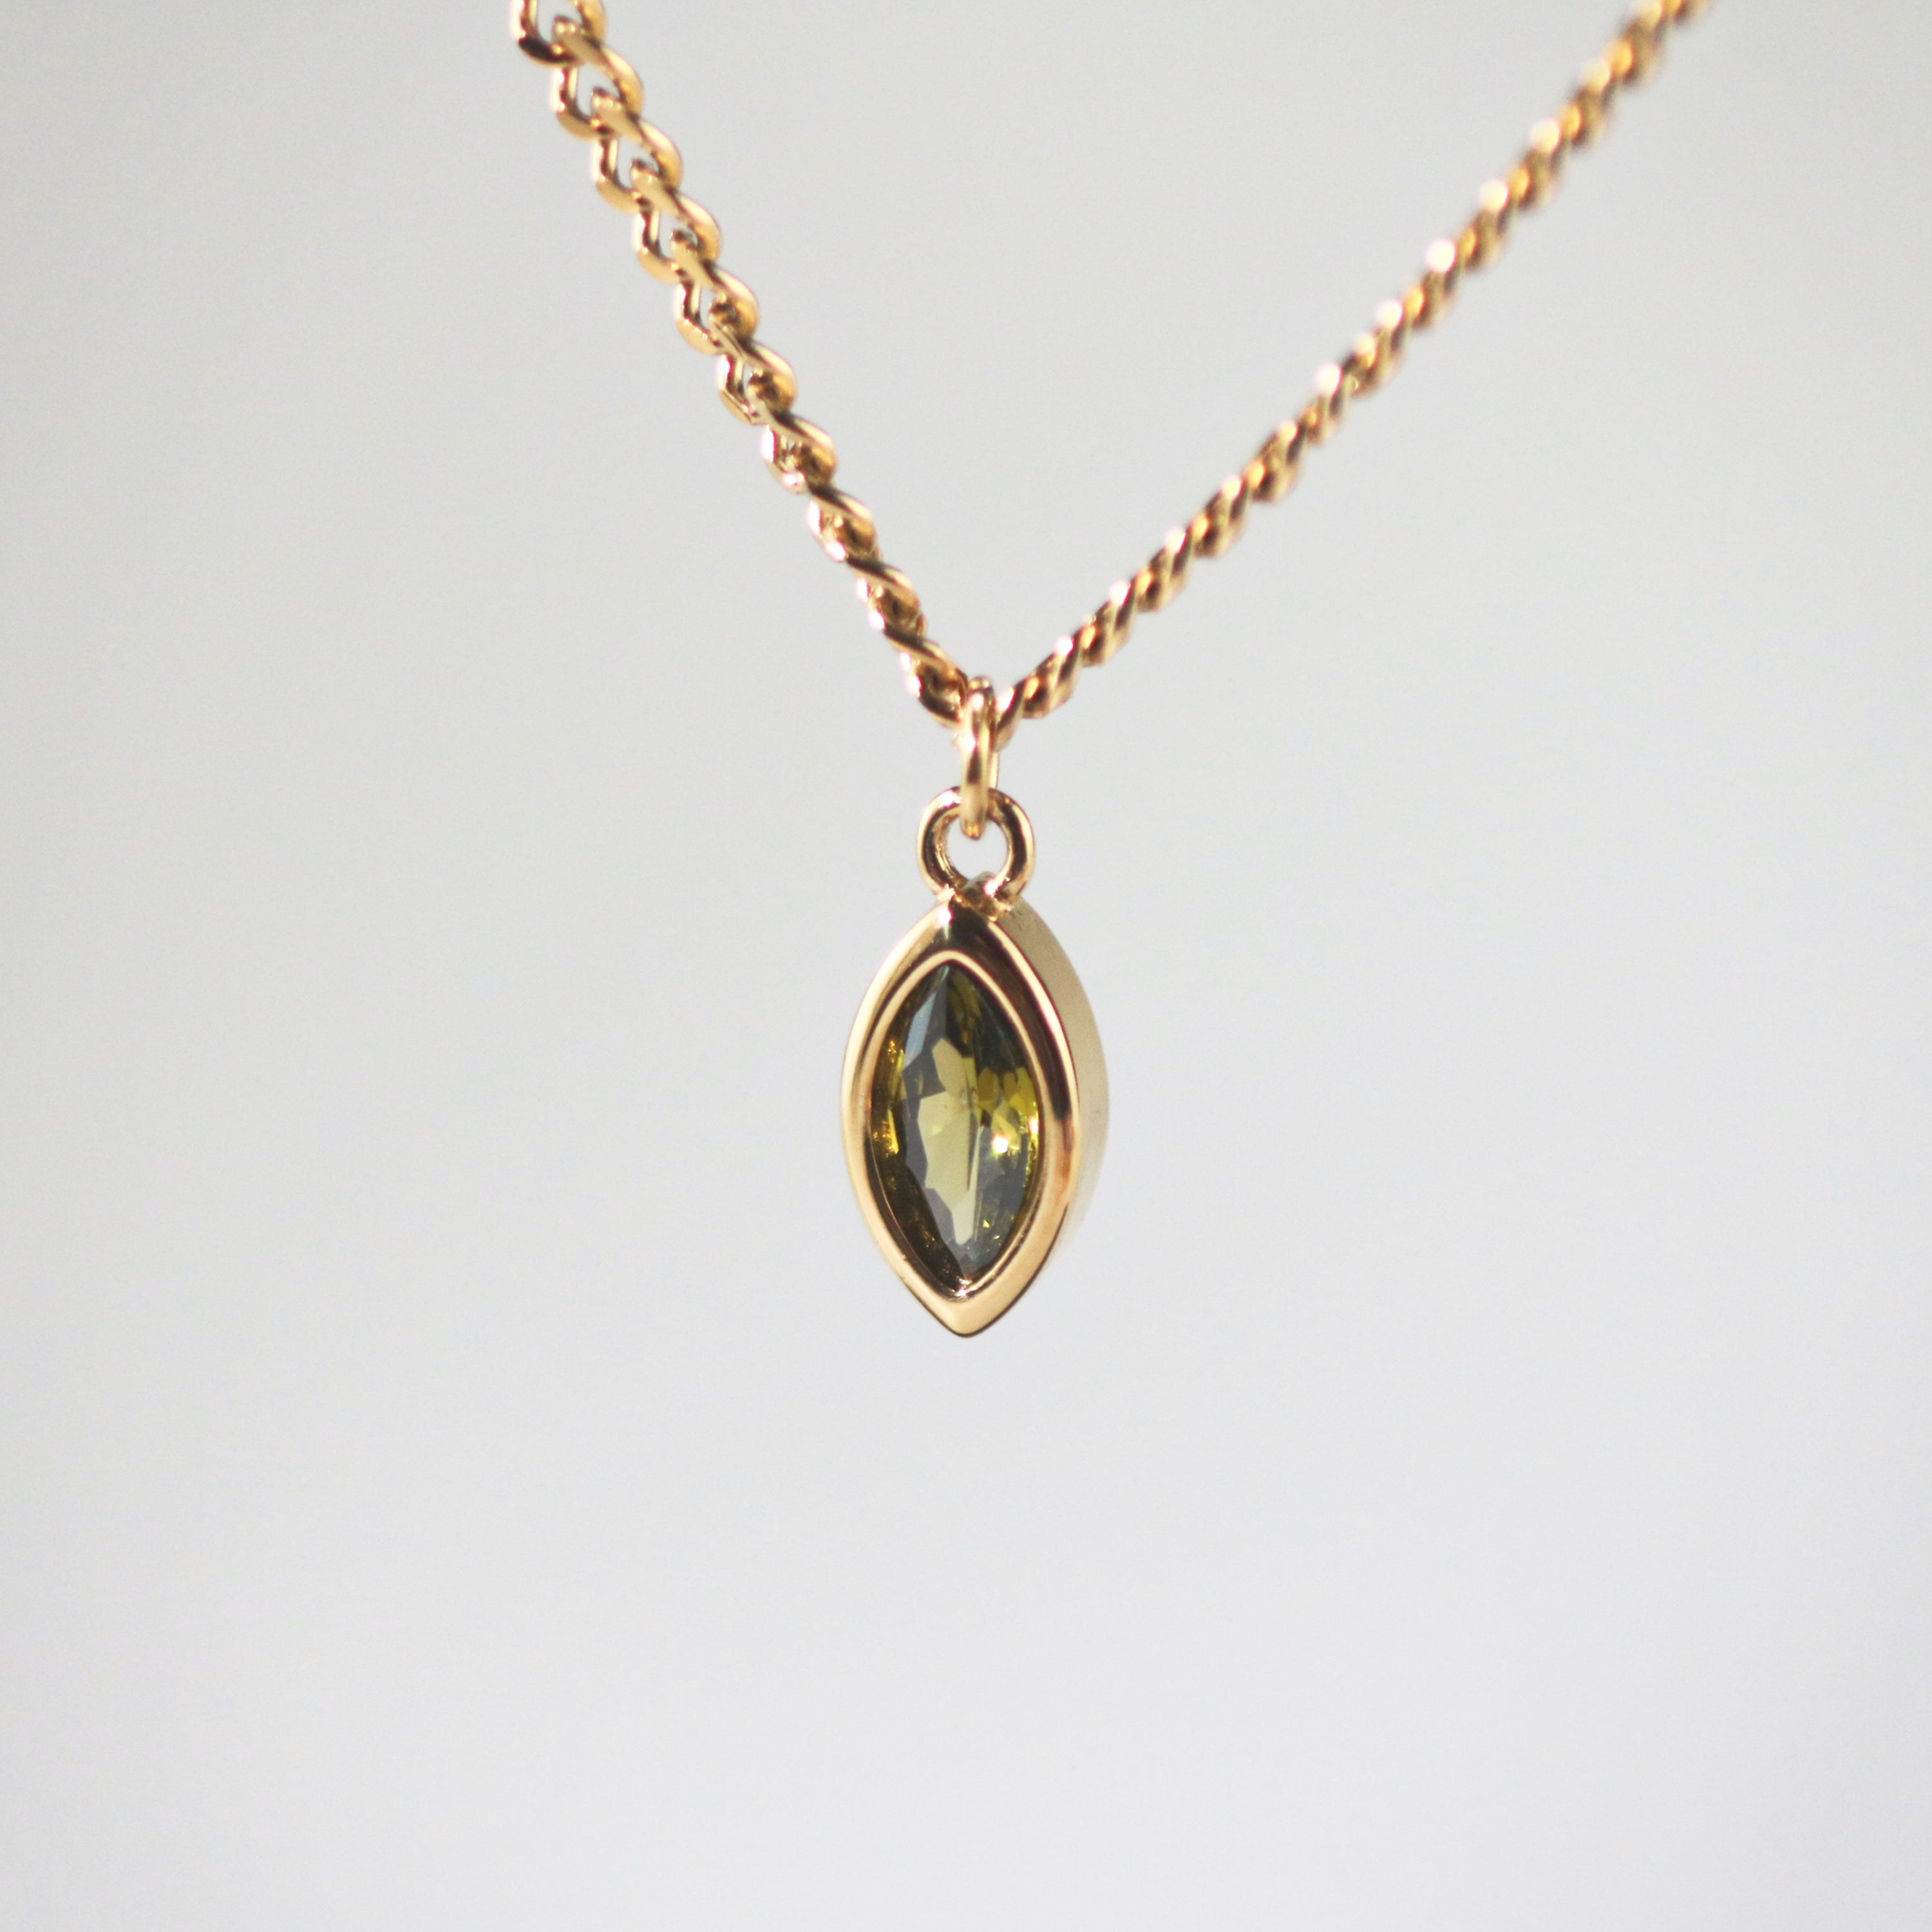 Meideya Jewelry Olive Green Sapphire Marquise Pendant Necklace